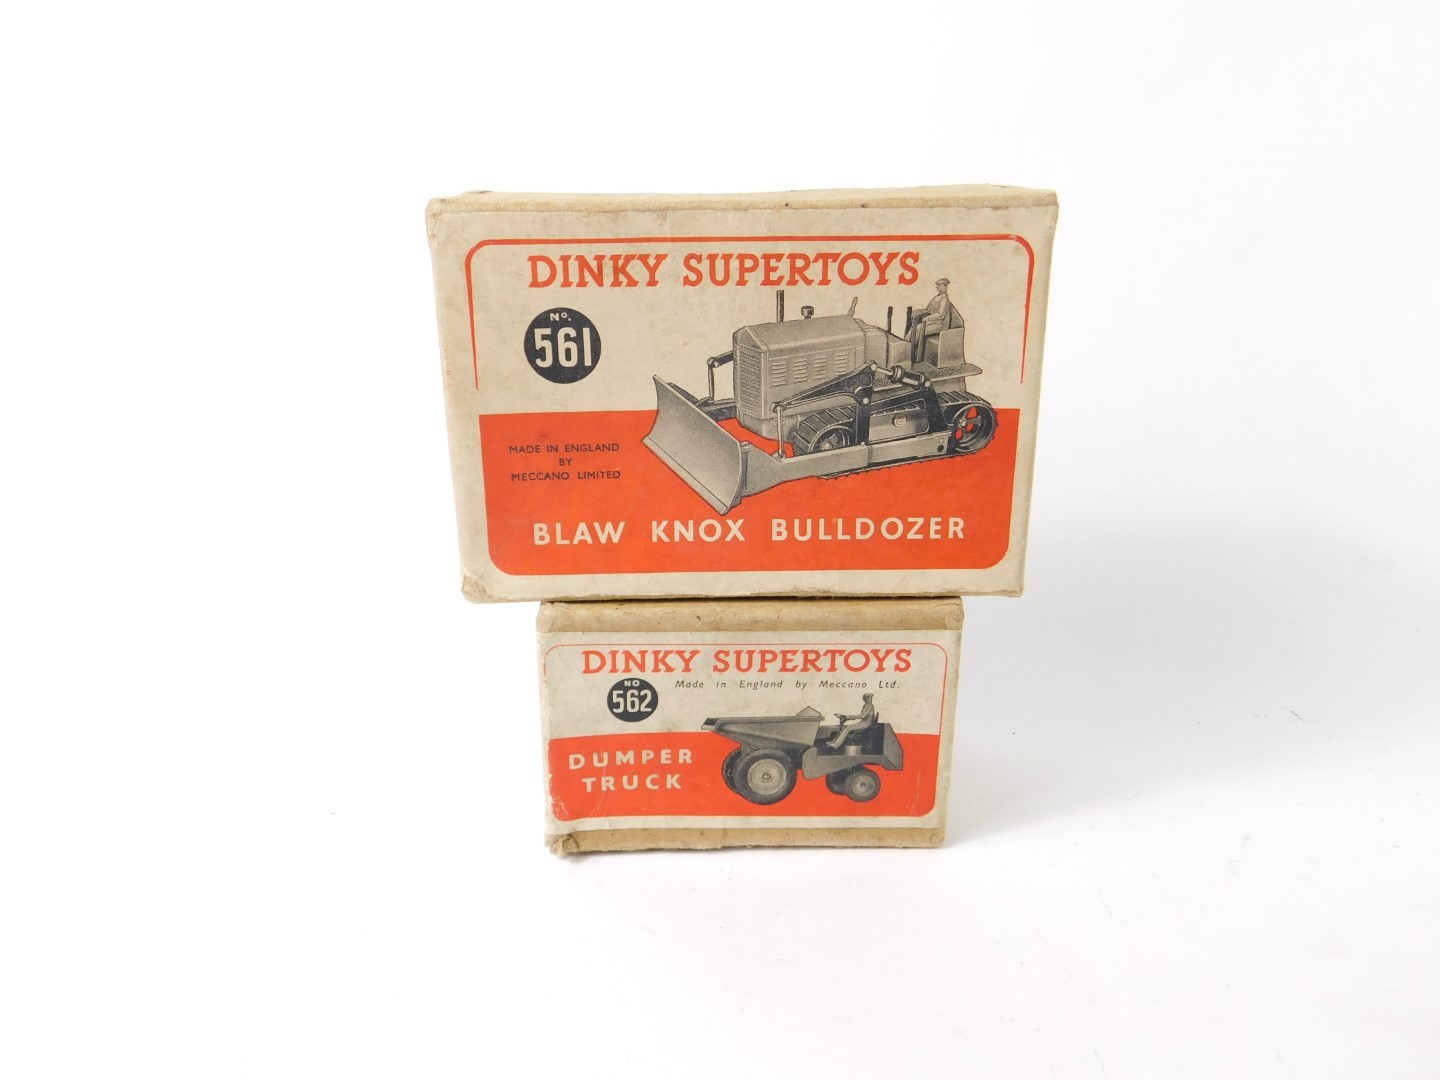 A Dinky Supertoys Blaw Knox bulldozer, red body with driver and crawler tracks, No 561, together - Image 3 of 3